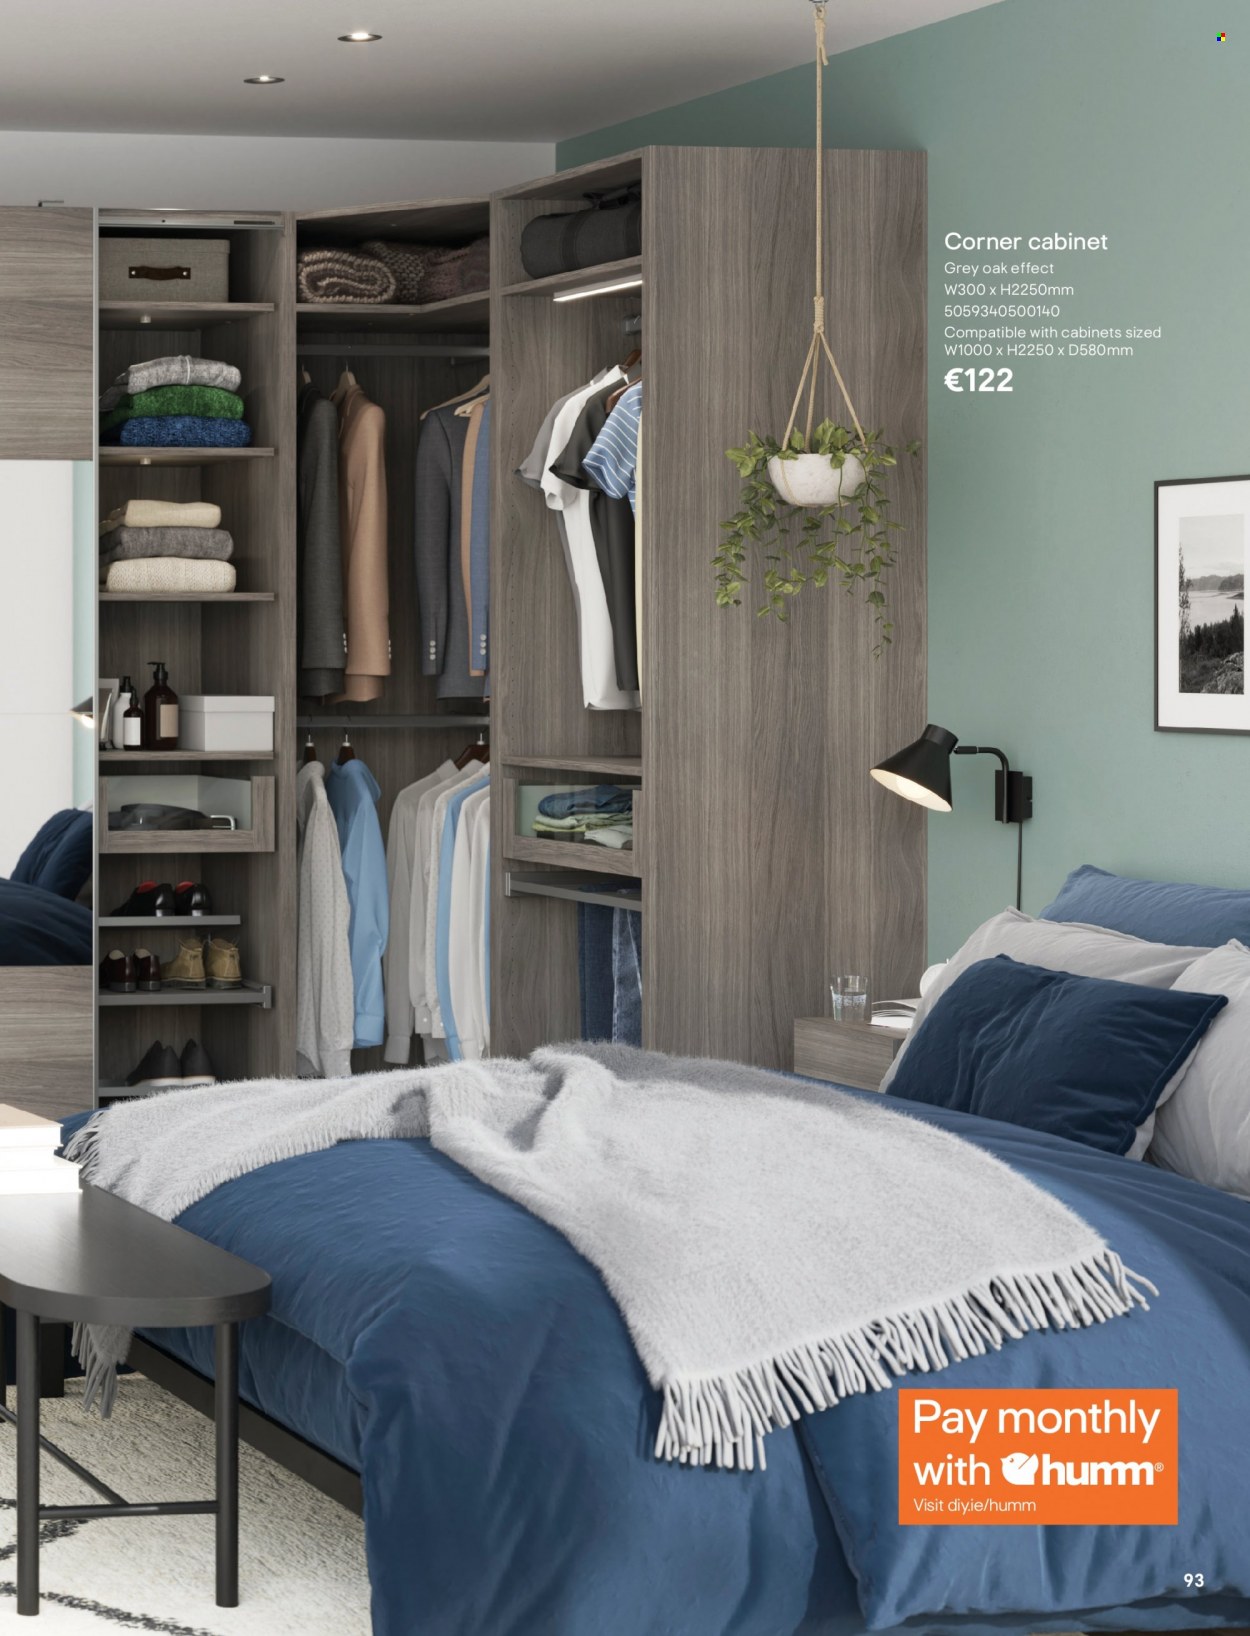 B&Q offer . Page 93.